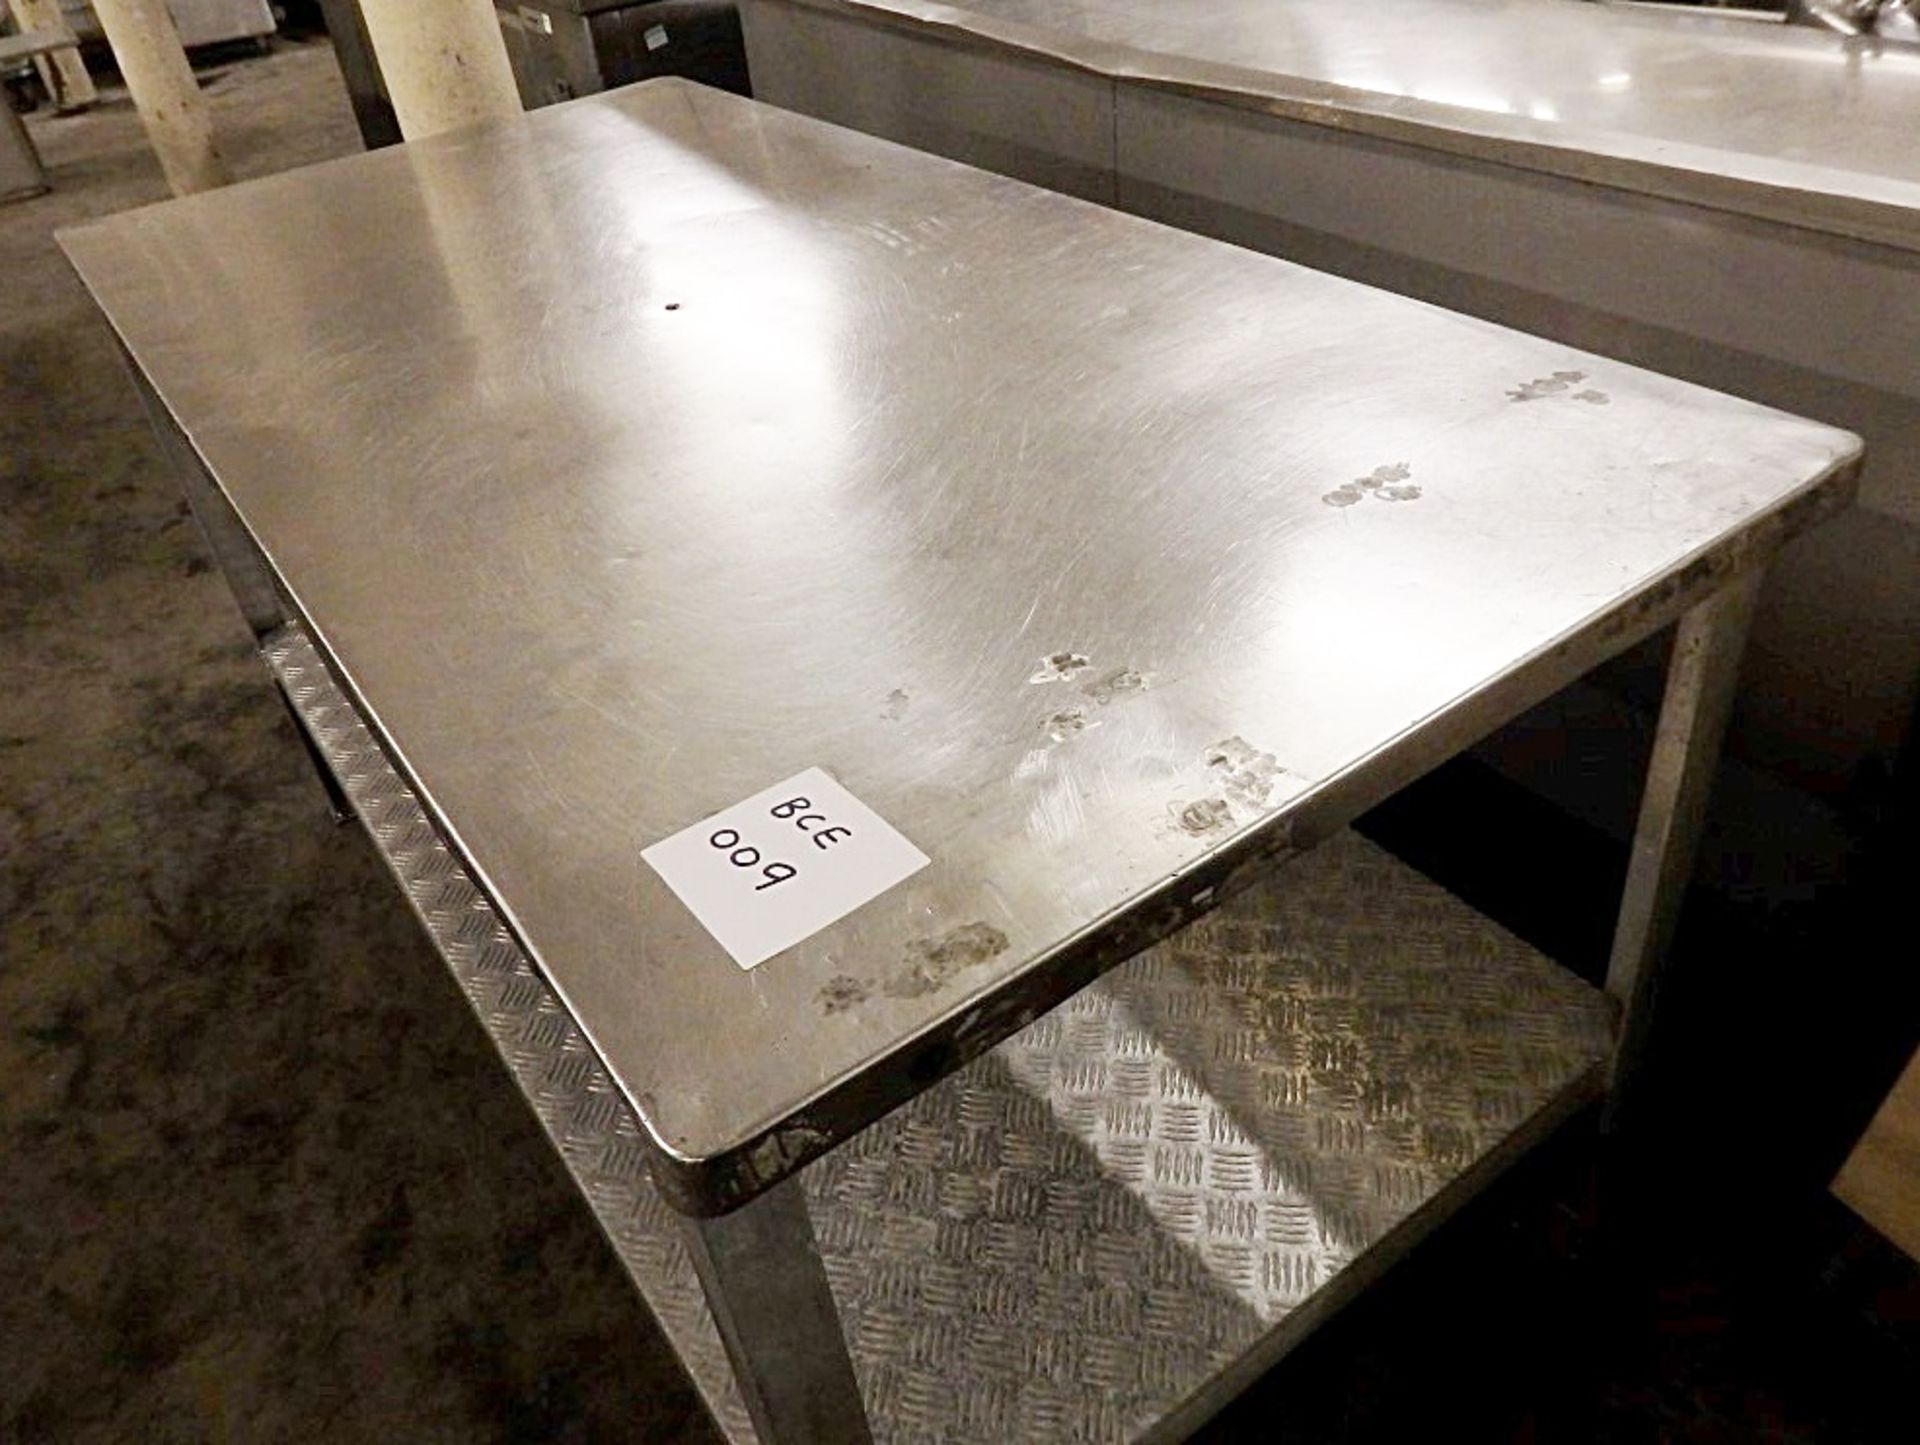 1 x Stainless Steel Commercial Catering Preparation Table - Dimensions: W176 x D84 x H89cm - Ref: - Image 3 of 6